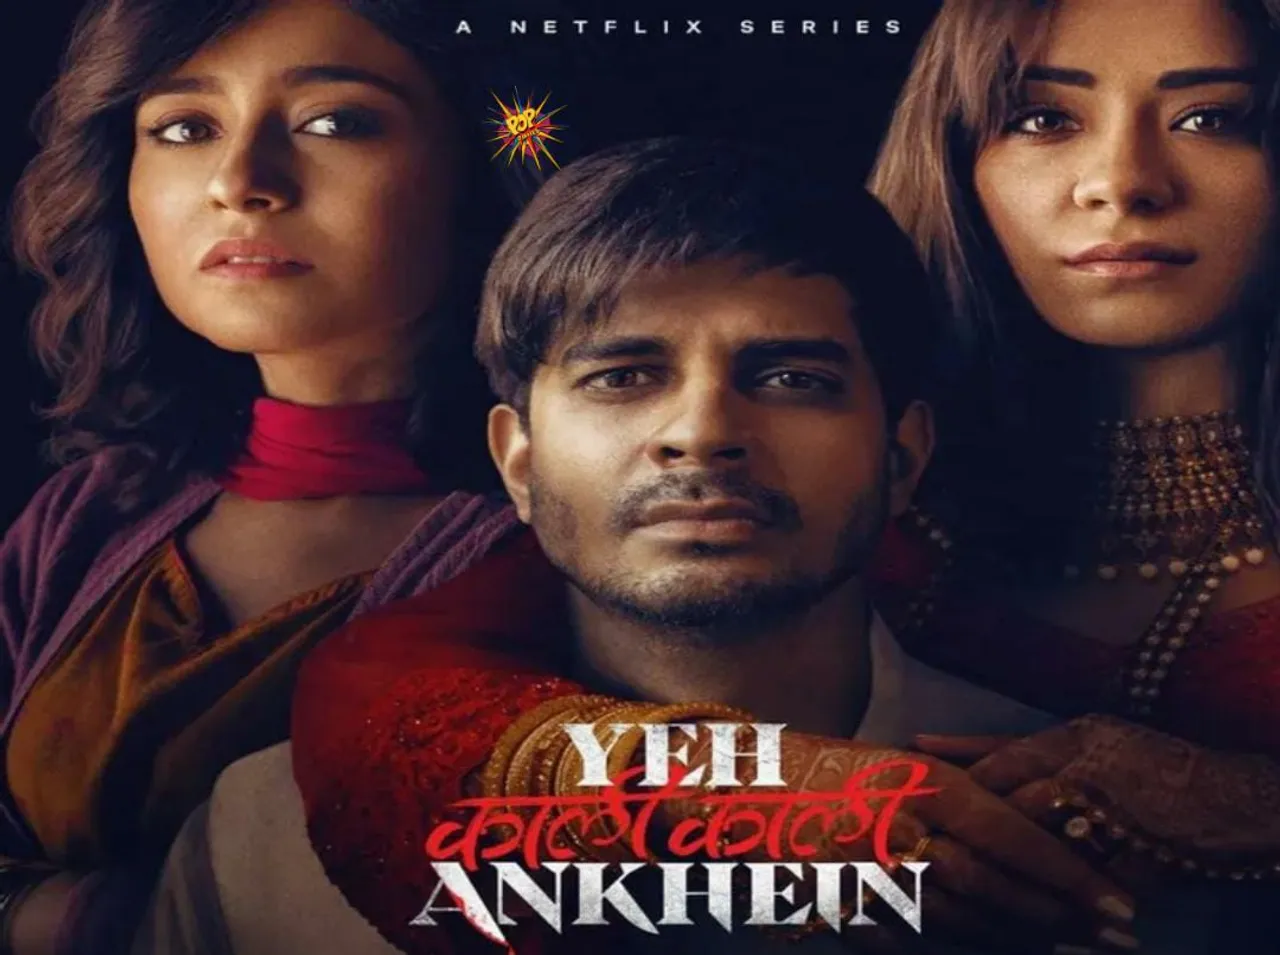 NETFLIX'S YEH KAALI KAALI ANKHEIN SET TO RETURN WITH S2 AFTER AN OVERWHELMING RESPONSE FROM VIEWERS IN INDIA AND ACROSS THE WORLD